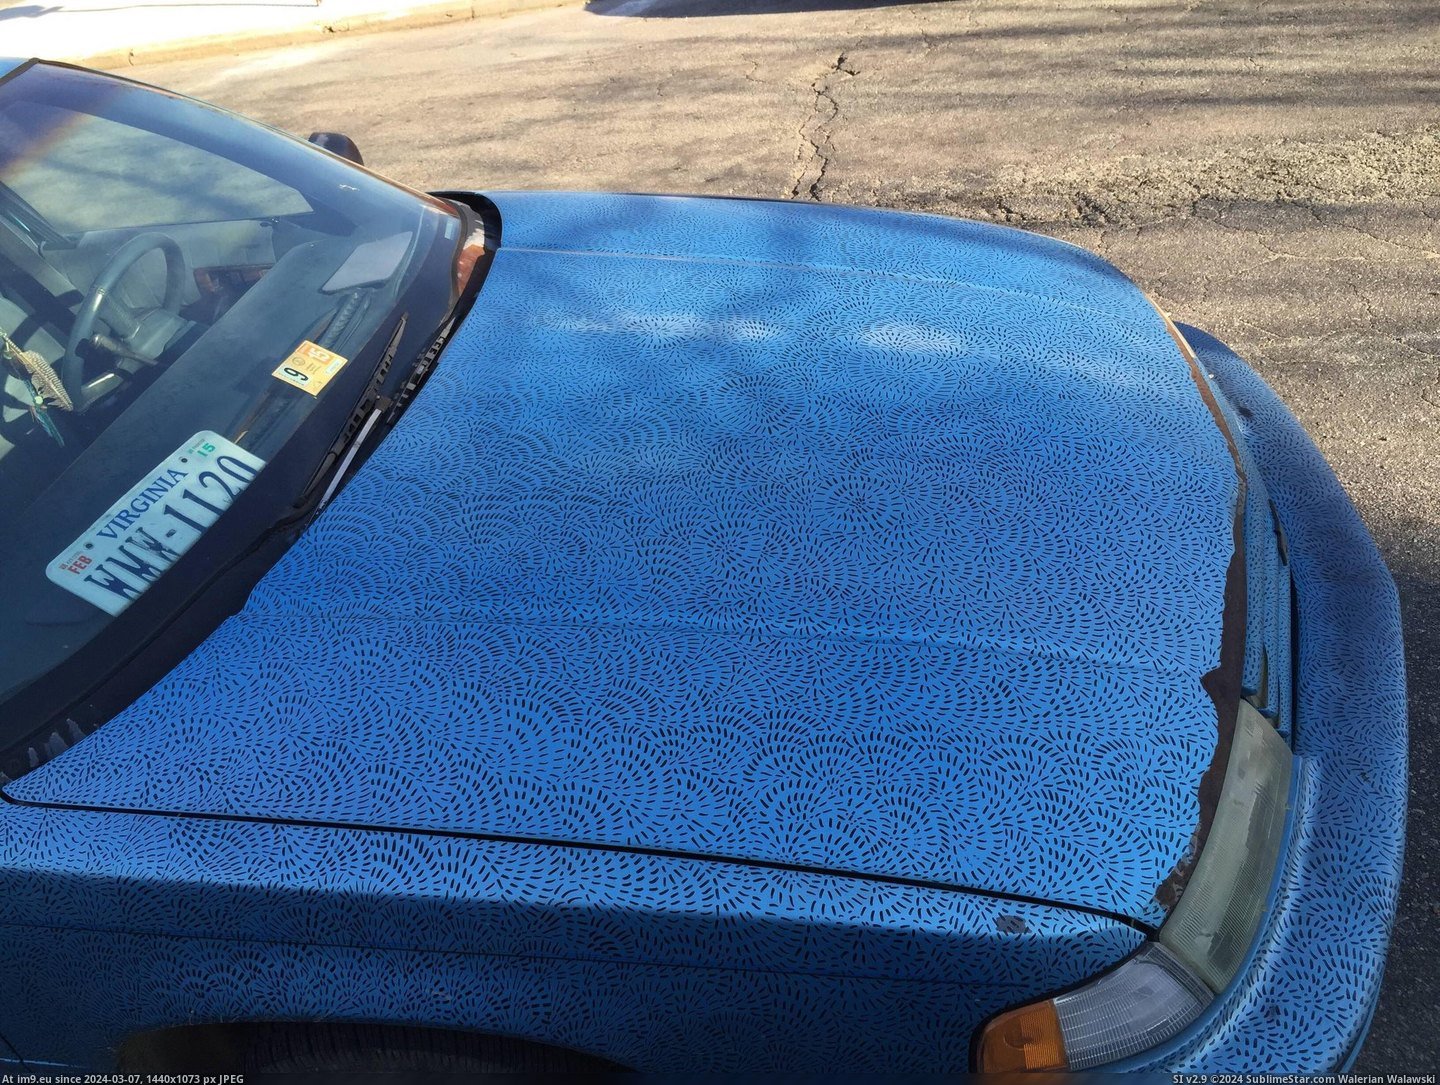 #Tiny #Entire #Sharpie #Markings #Car #Covered [Mildlyinteresting] The ENTIRE car was covered by tiny sharpie markings. Pic. (Image of album My r/MILDLYINTERESTING favs))